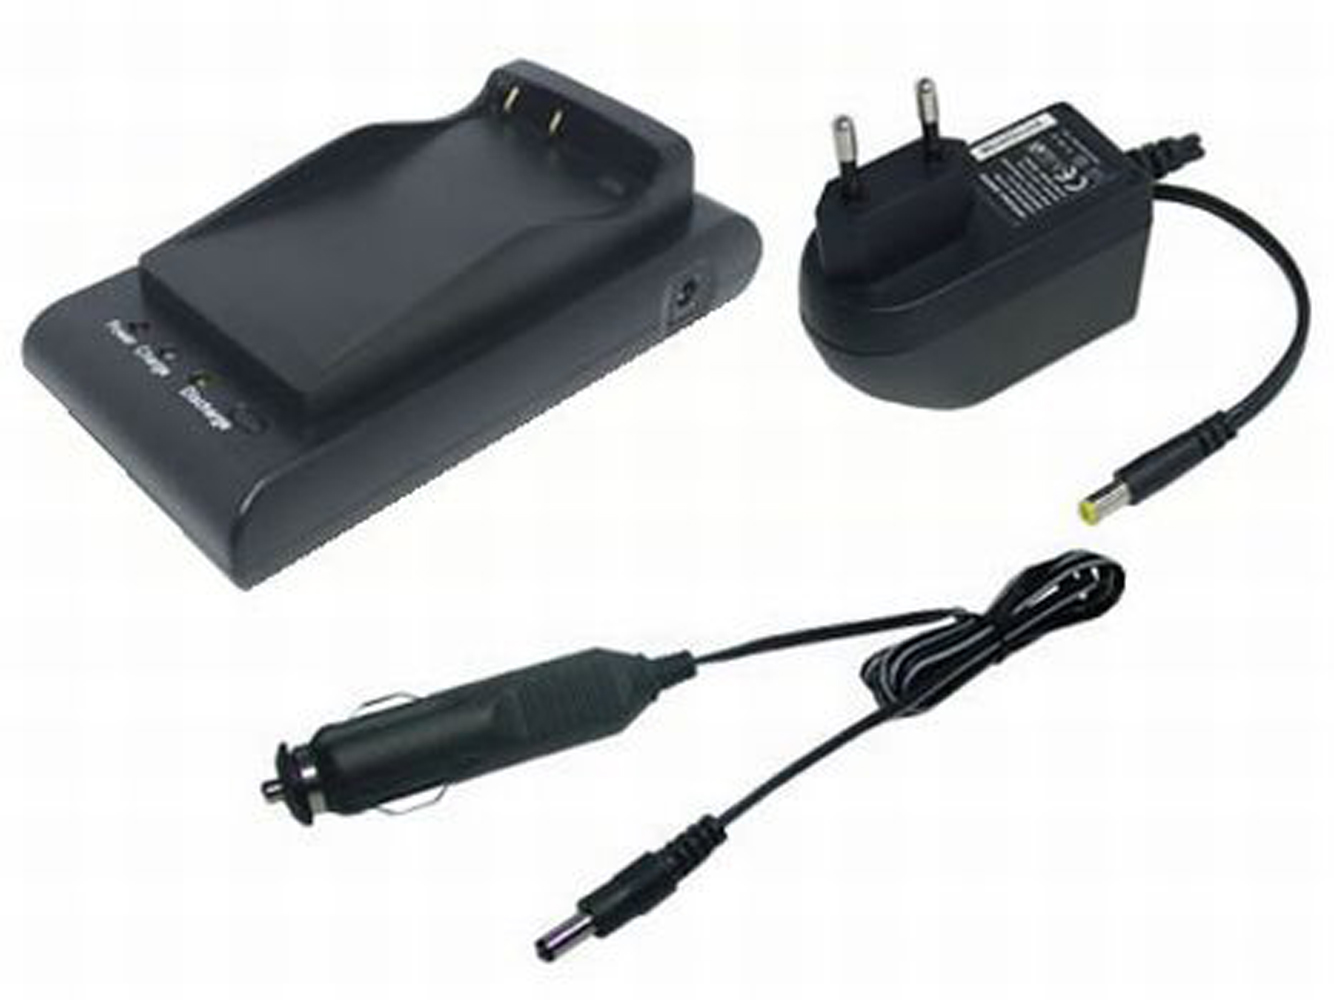 Canon Bp-711, Bp-714 Battery Chargers For Canon Eq305, Canon Uc8000 replacement